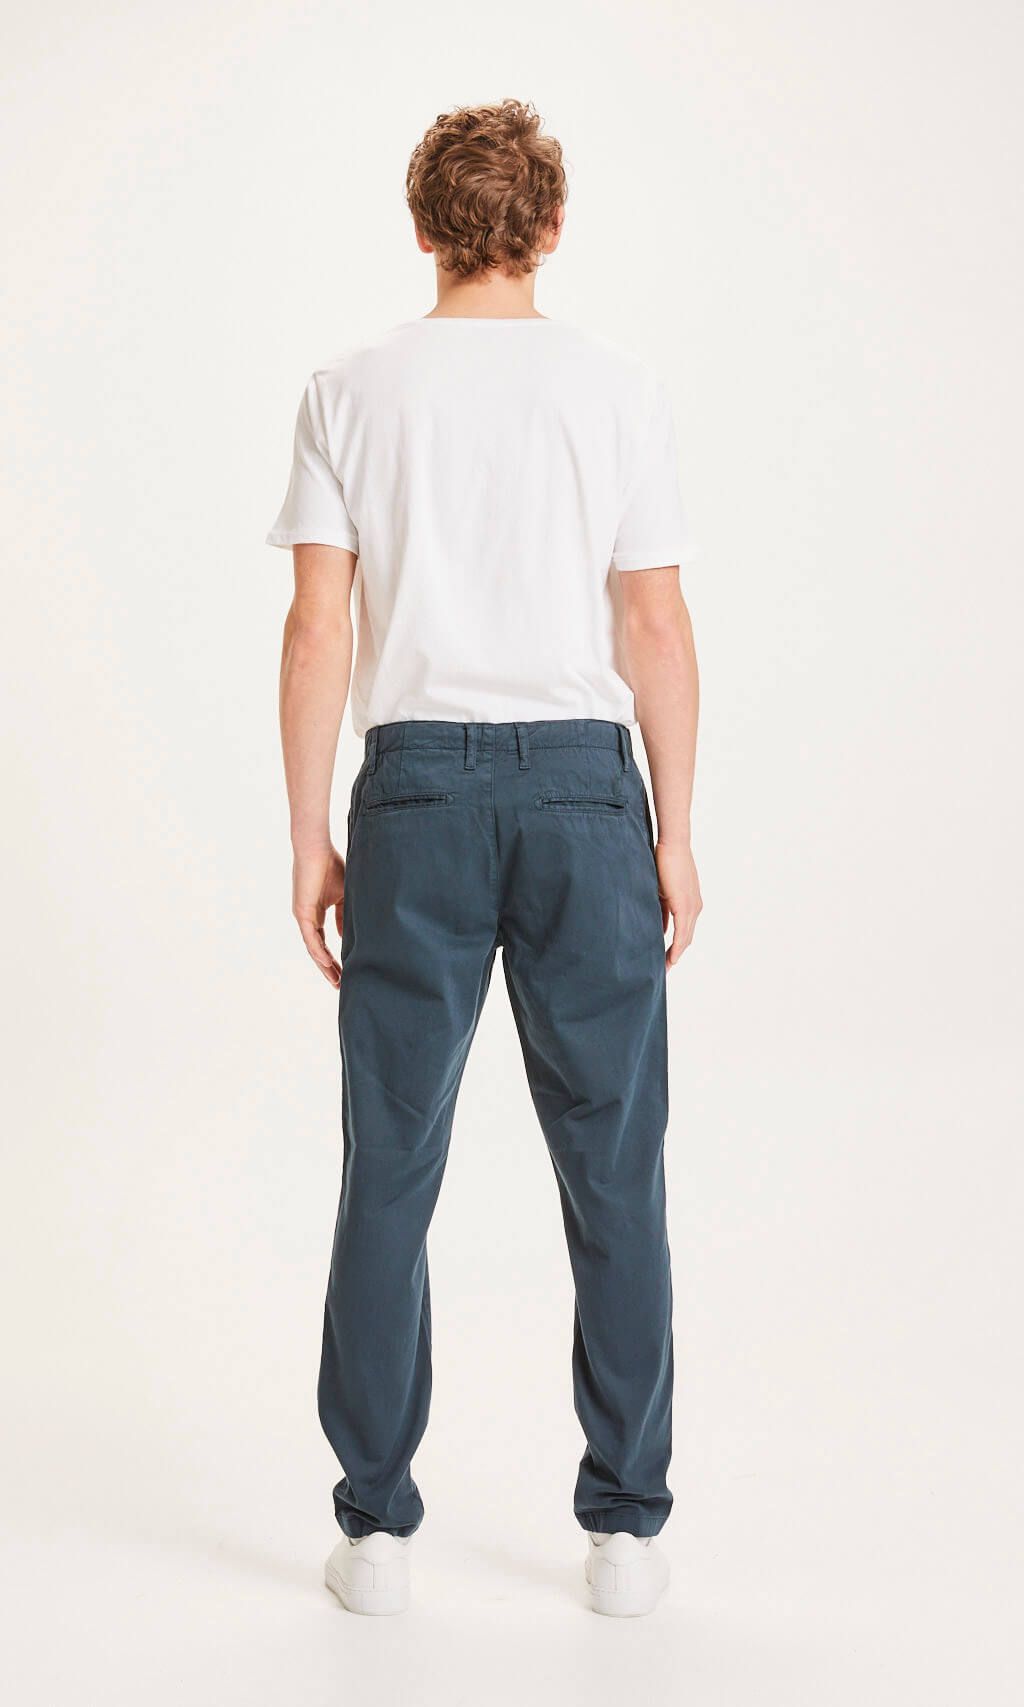 Chuck Regular Stretched Chino Pant Total Eclipse 34/32